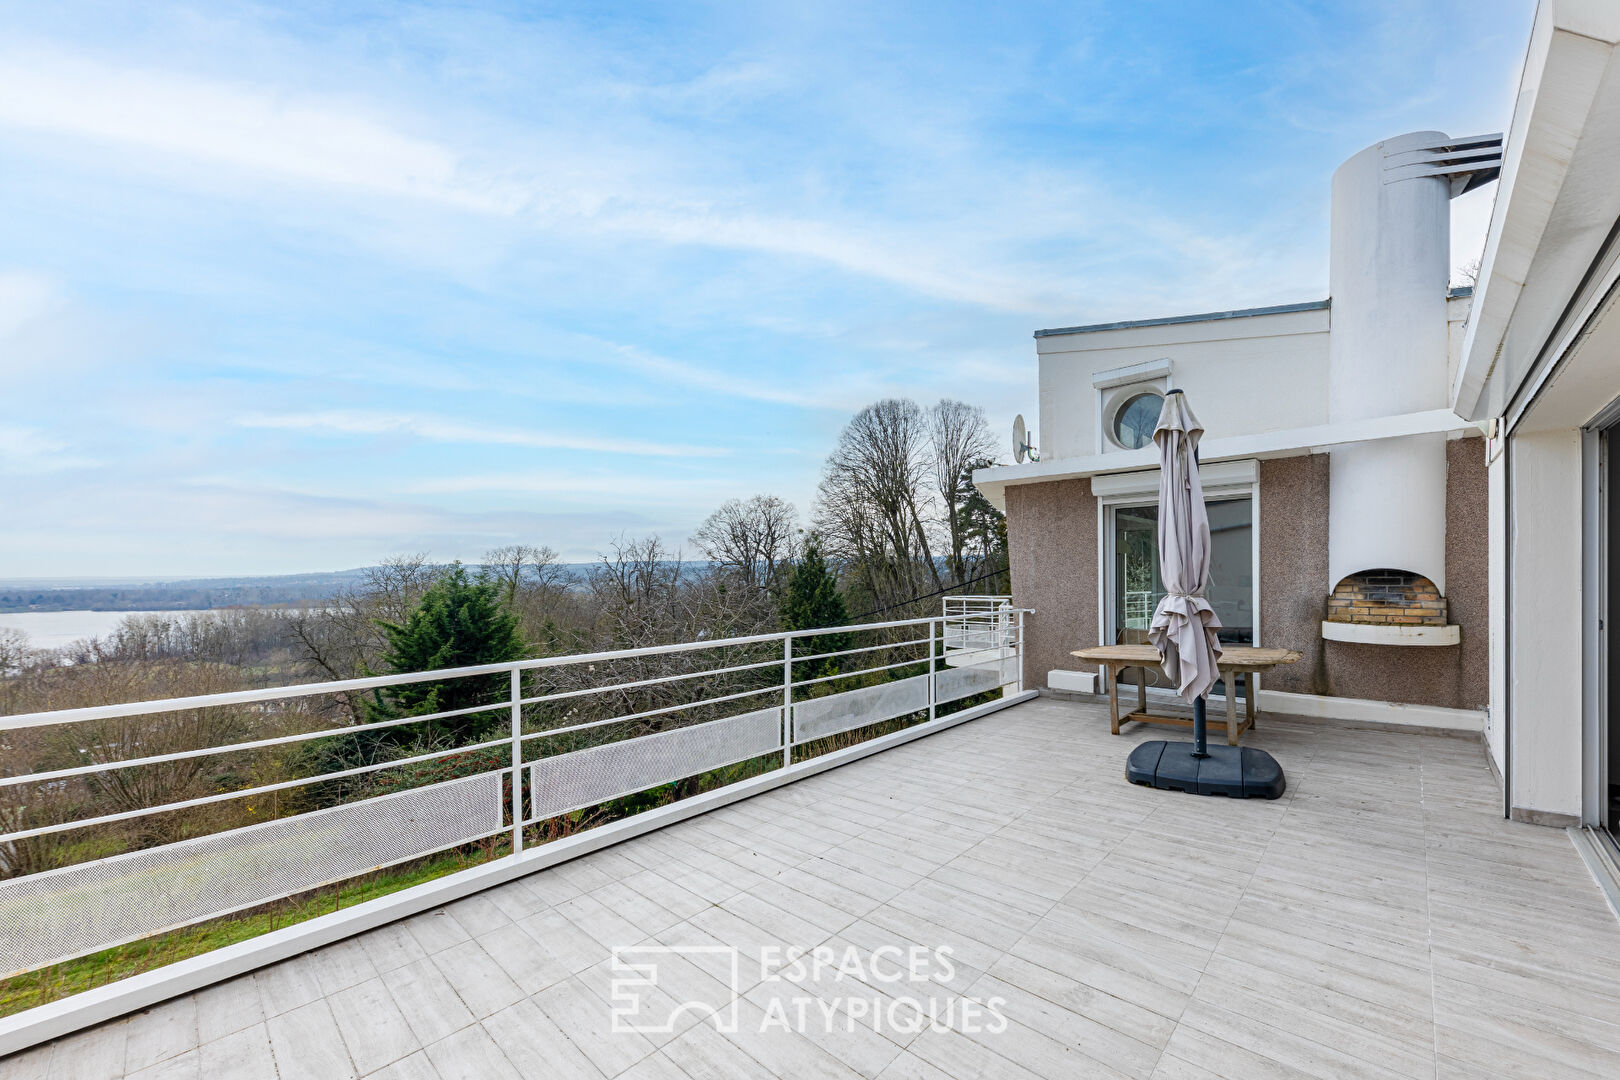 Architect-designed house with exceptional views of the Cergy ponds and indoor swimming pool.